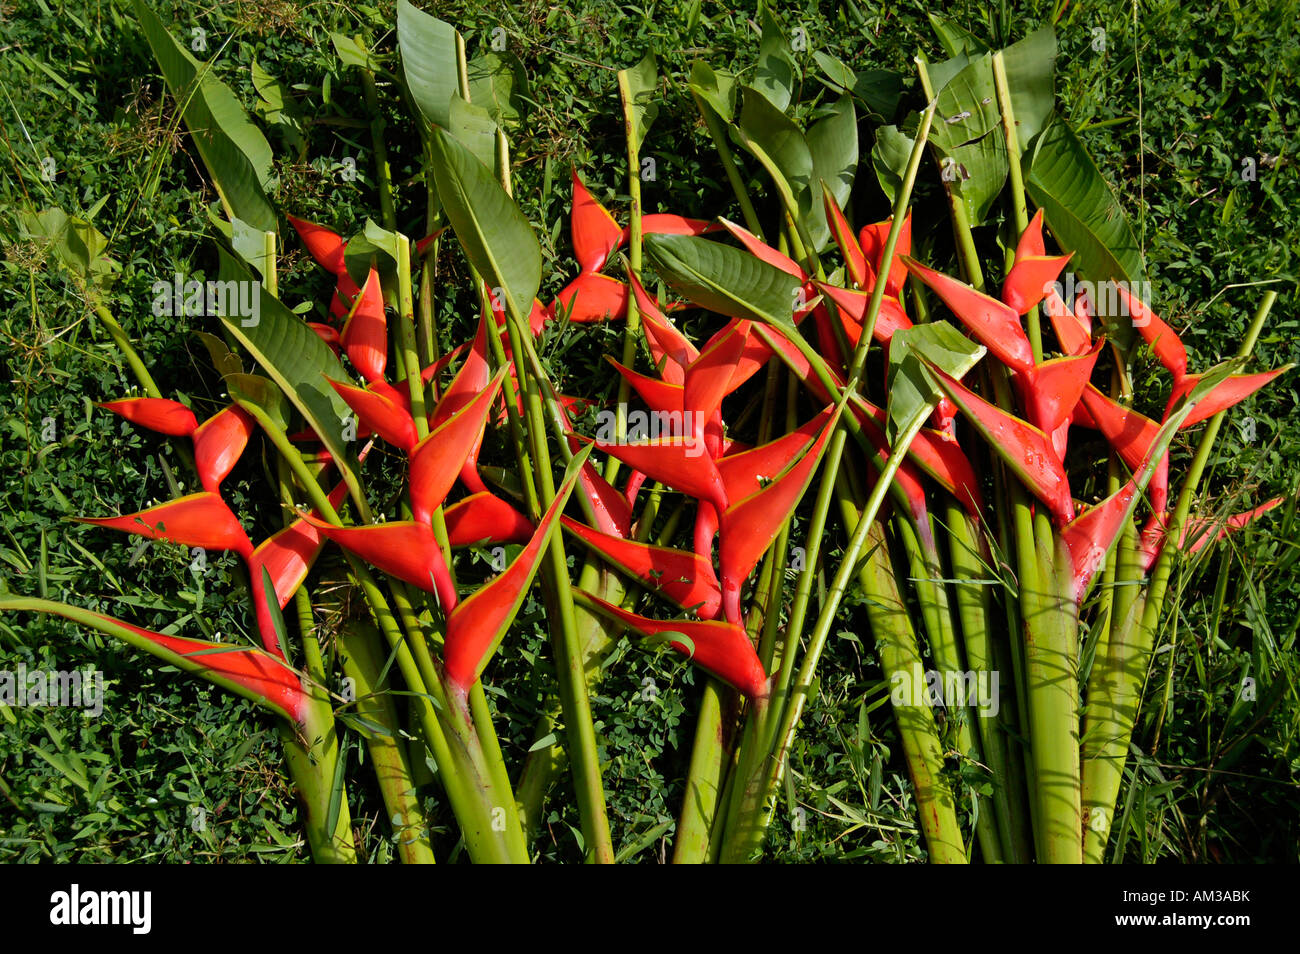 iris, bright red flowers ready for arrangement and decorations. Stock Photo